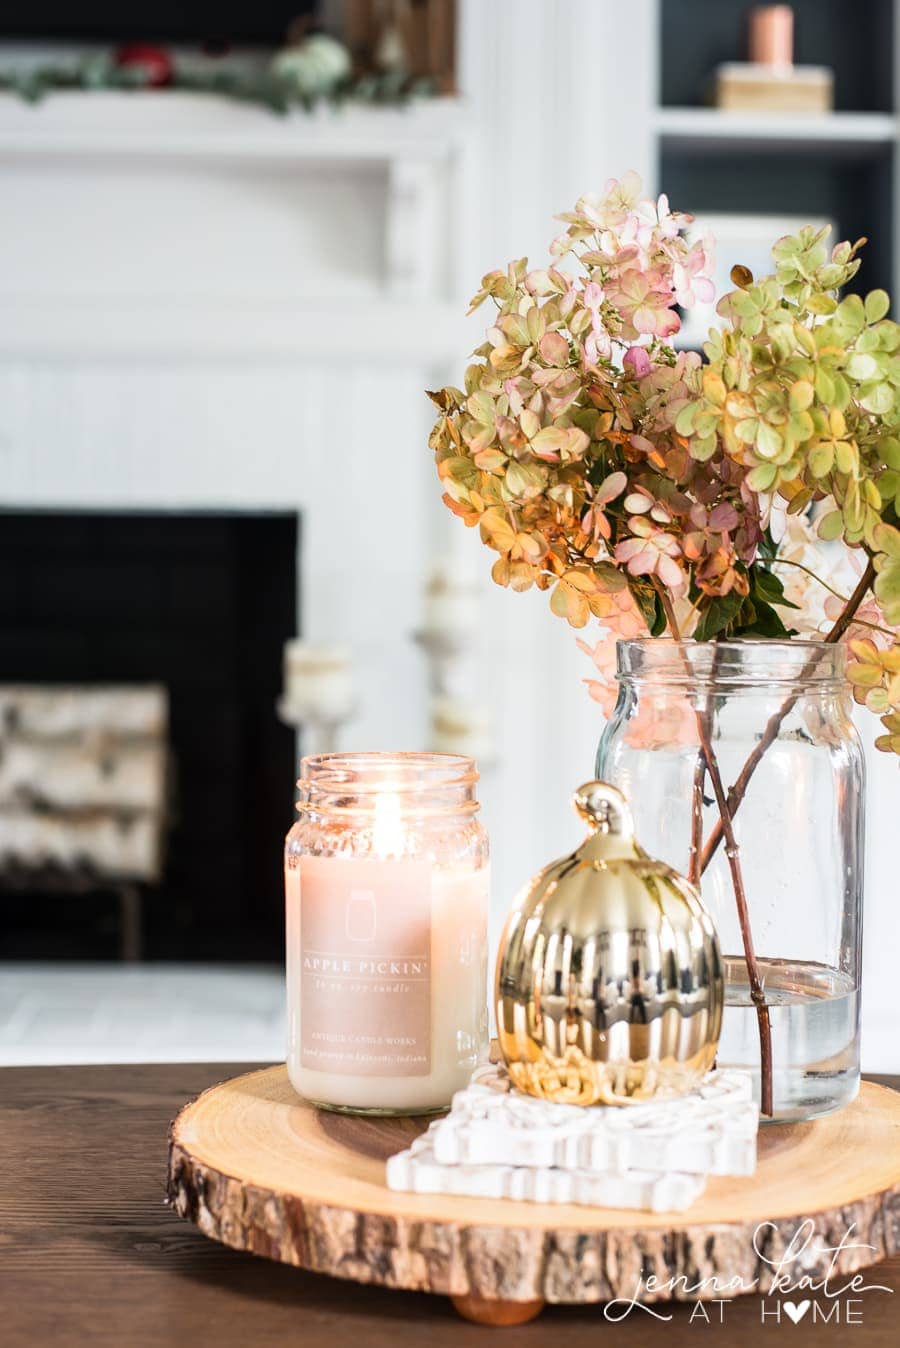 Dried hydrangeas in a vase are a free way to decorate with natural elements for fall